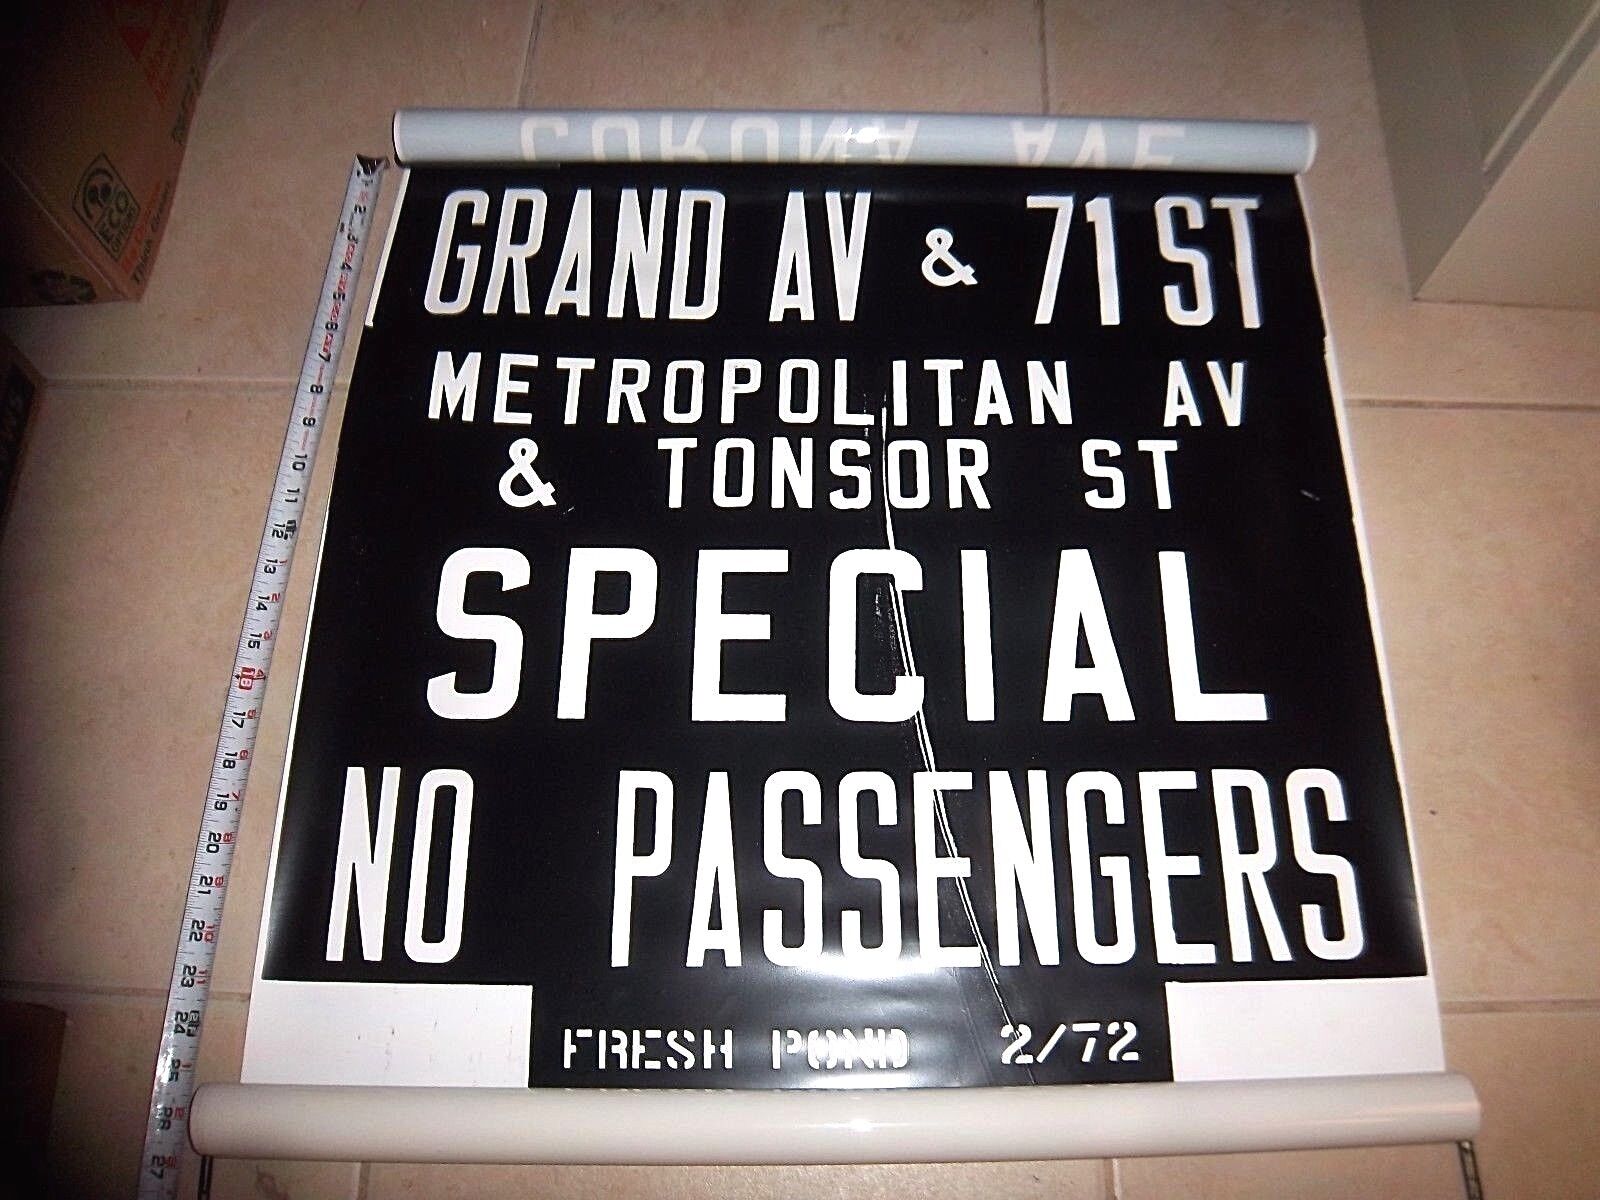 NY NYC BUS ROLL SIGN METROPOLITAN SPECIAL TONSOR GRAND AVE NO PASSENGERS QUEENS